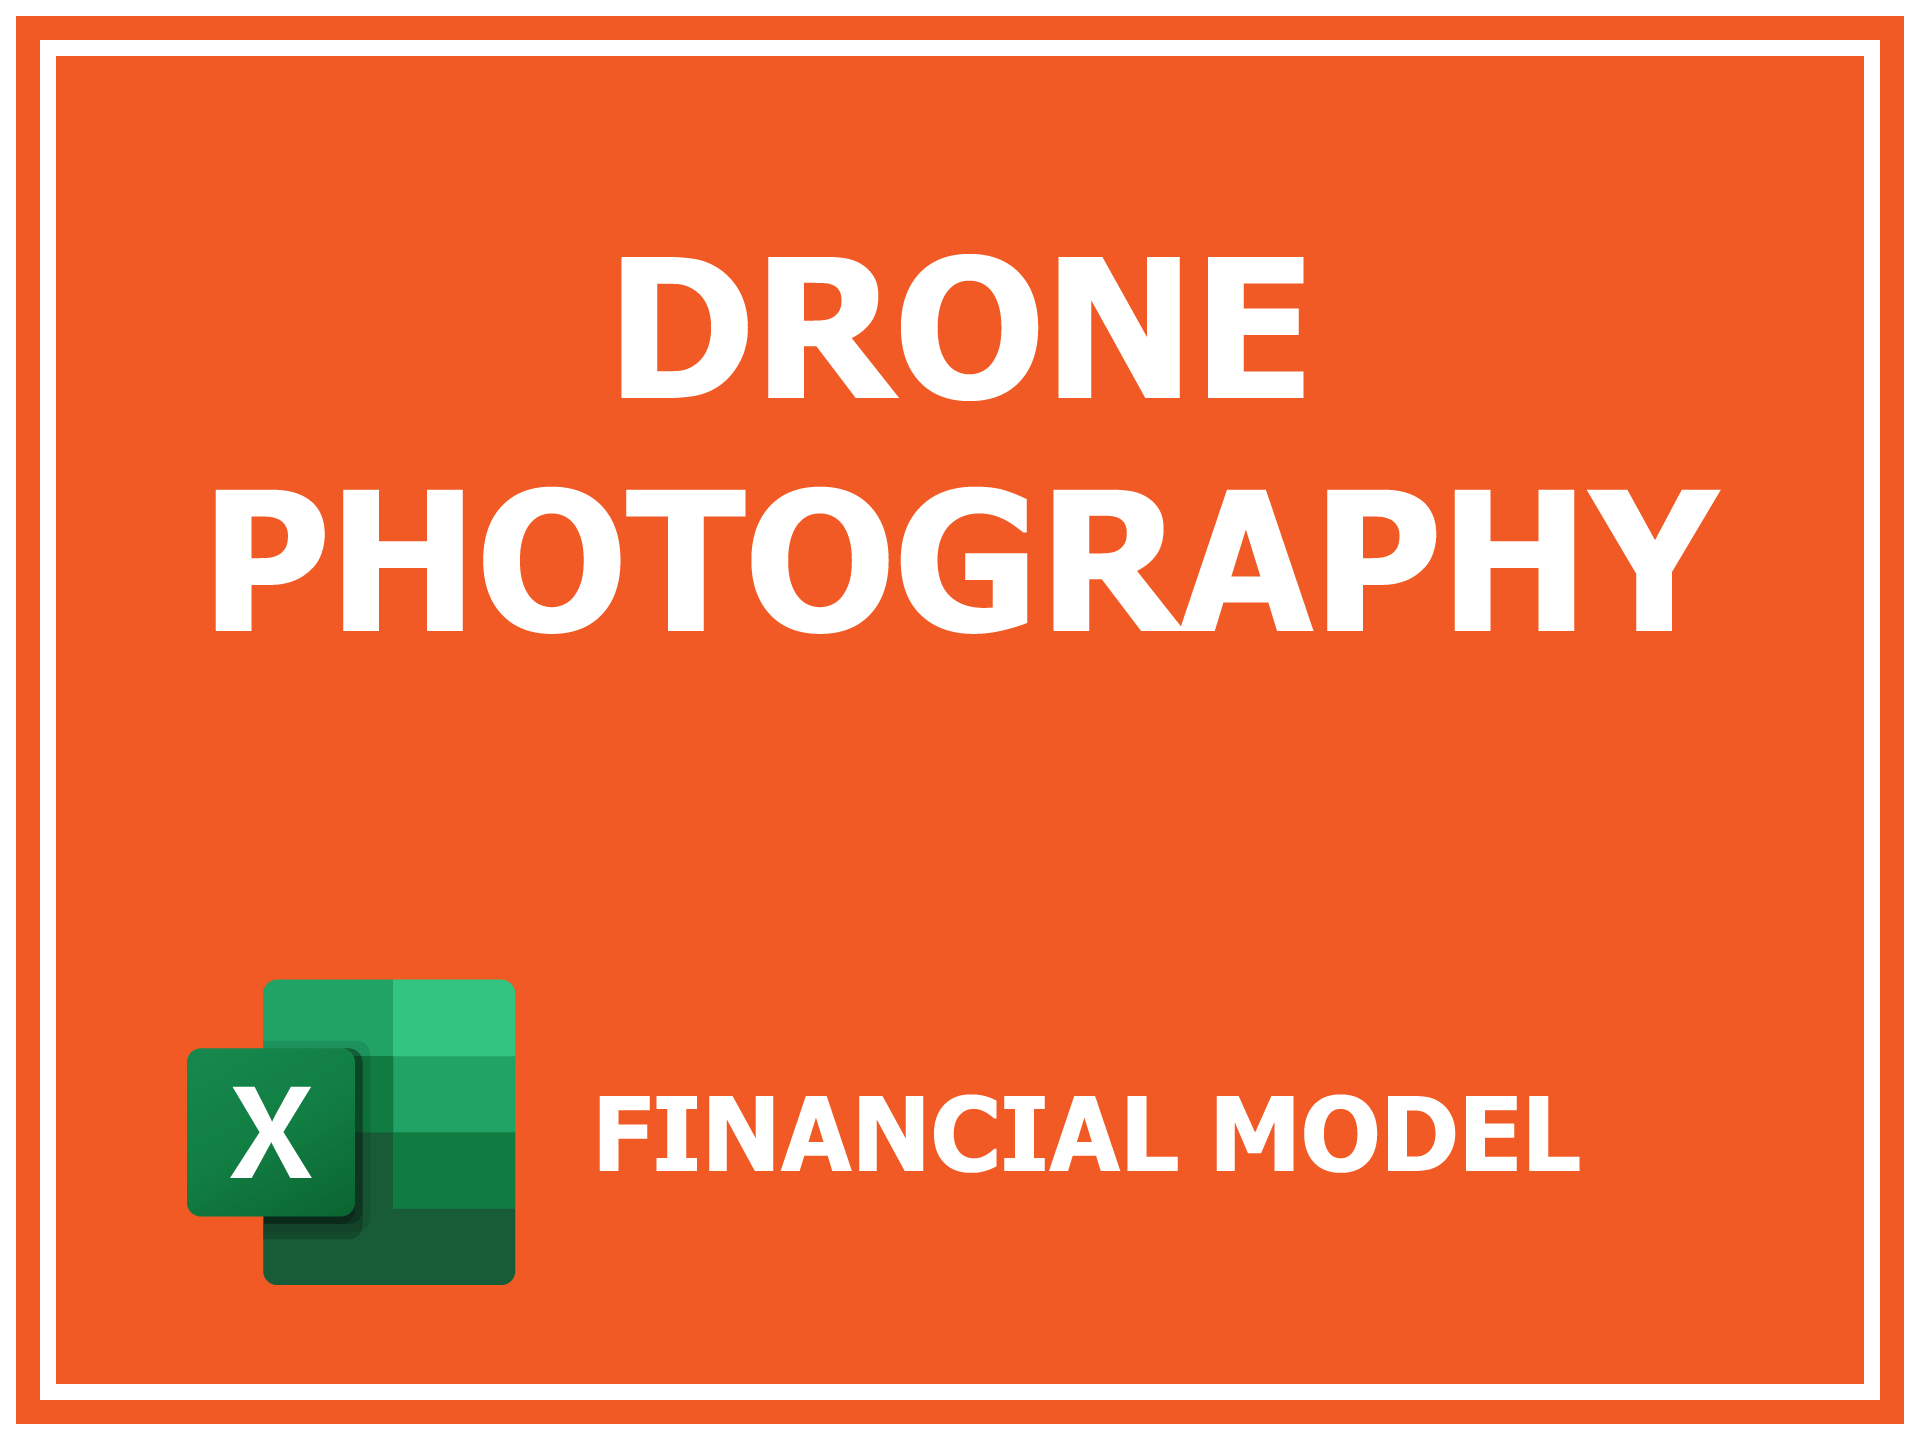 Drone Photography